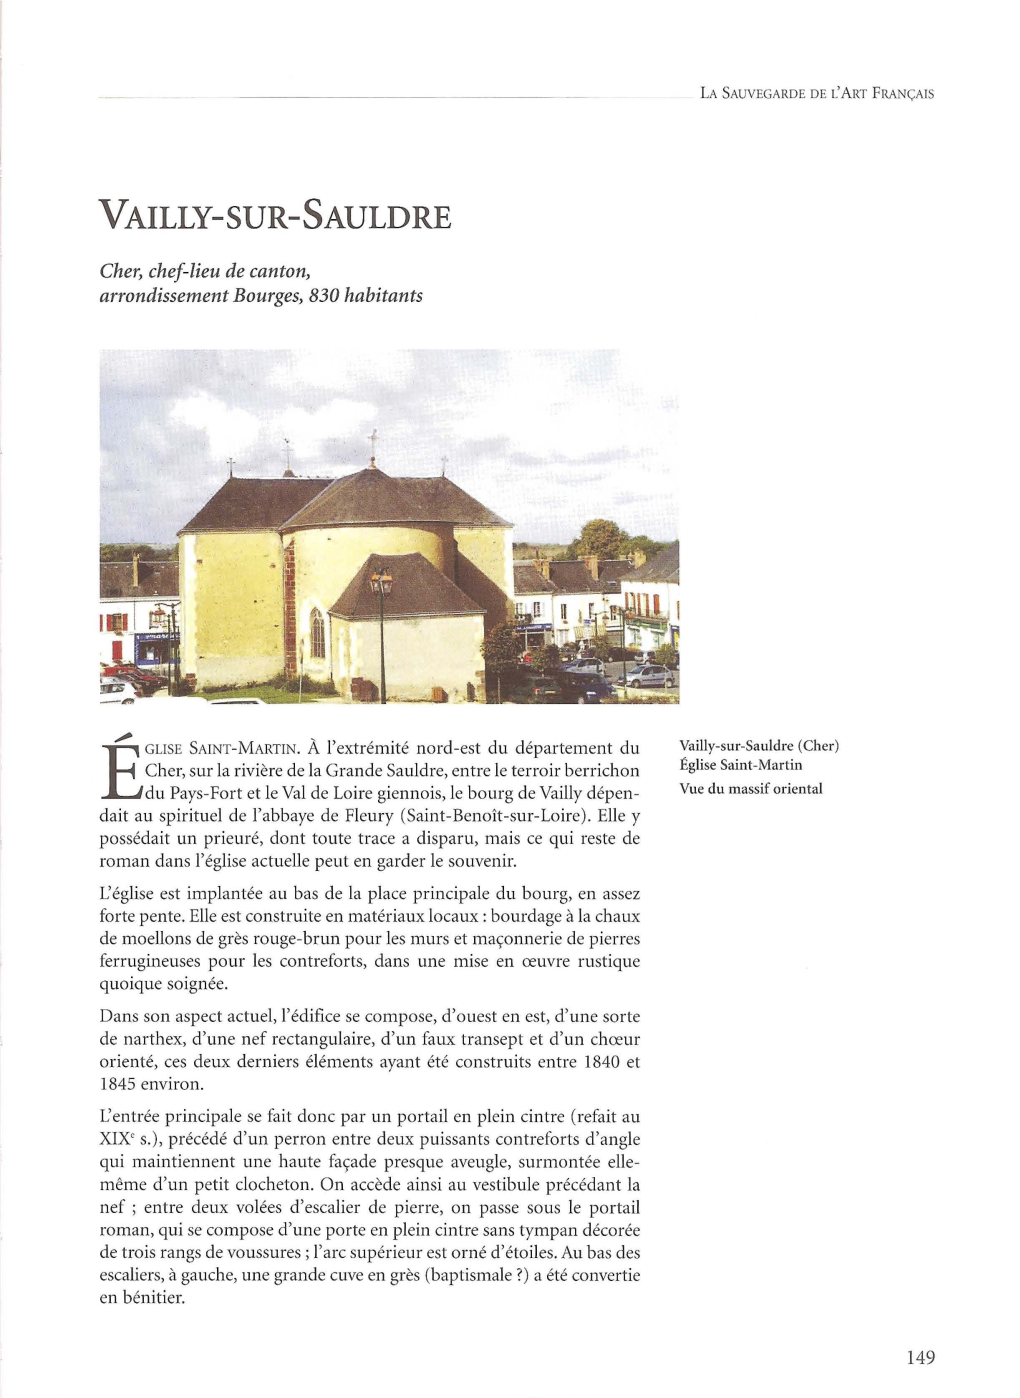 Vailly-Sur-Sauldre